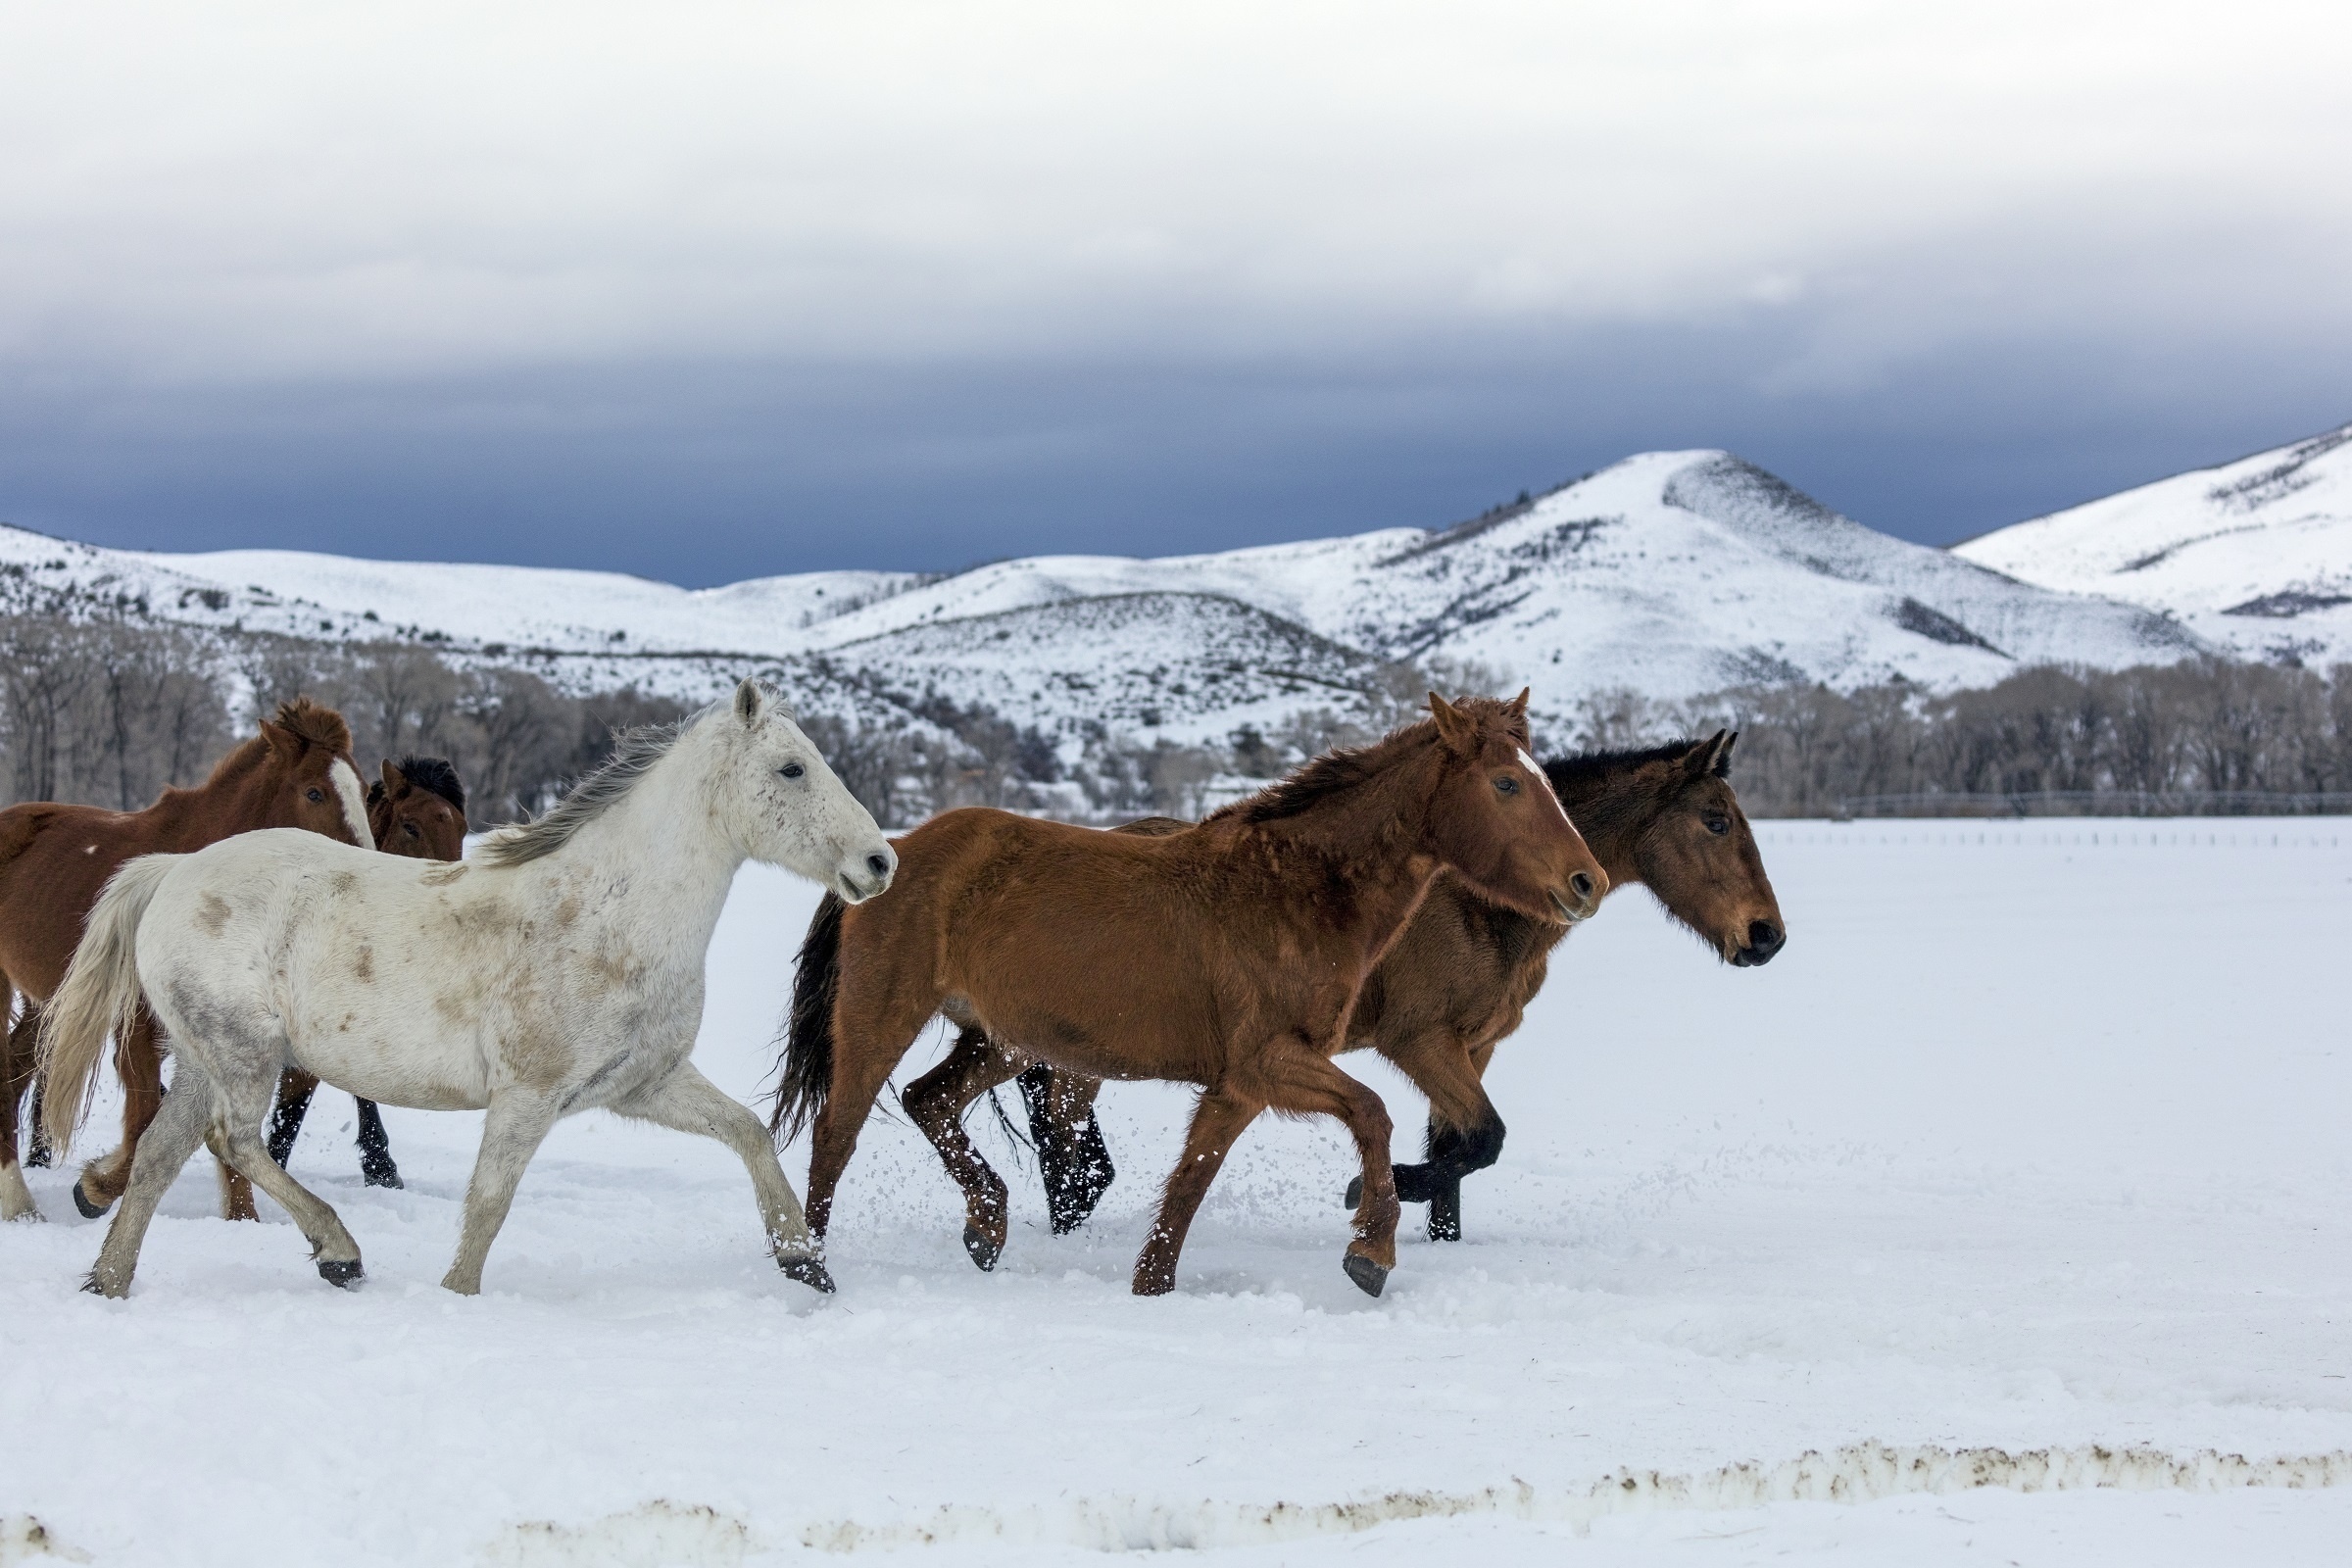 Horses in the snow, Winter horse photography, Herd in the snow, Striking mountain backdrop, 2400x1600 HD Desktop